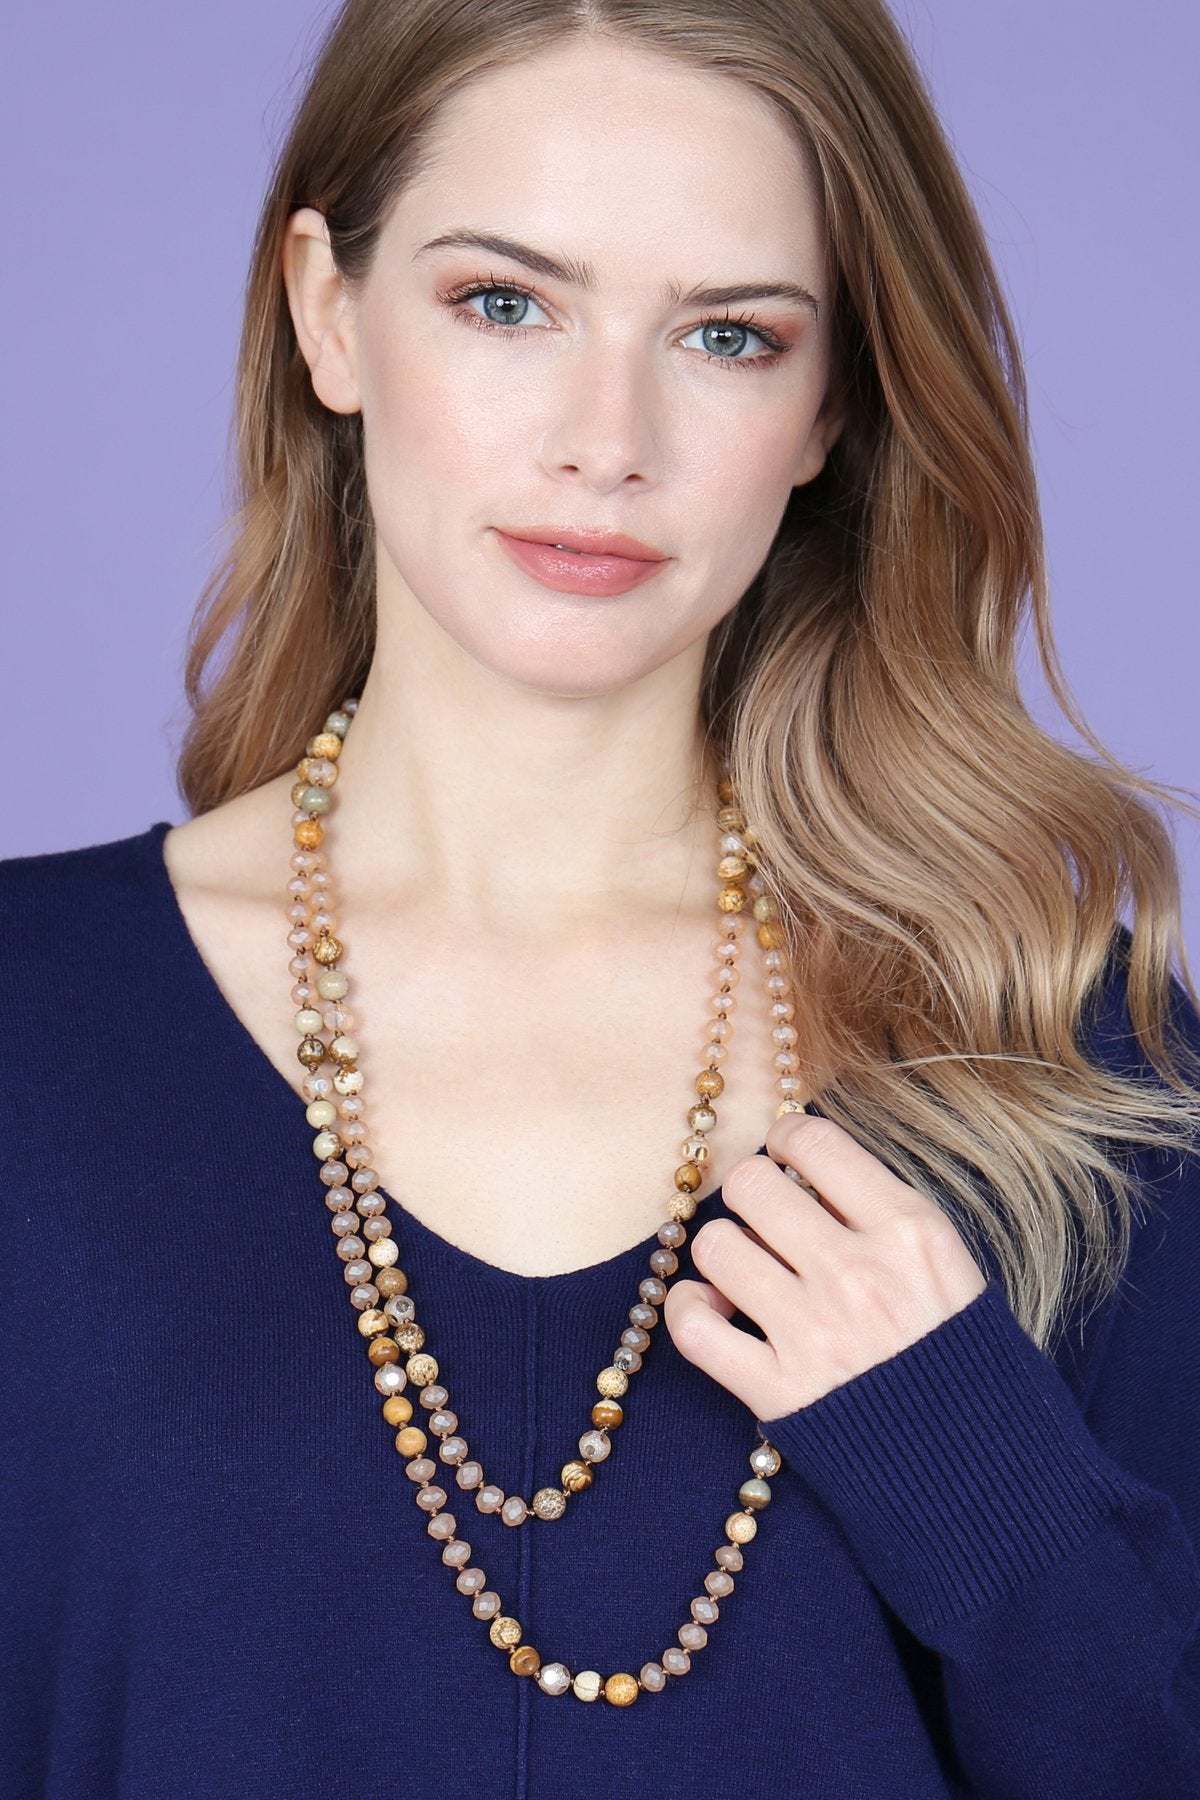 Hdn2526 - Longline Hand Knotted Necklace